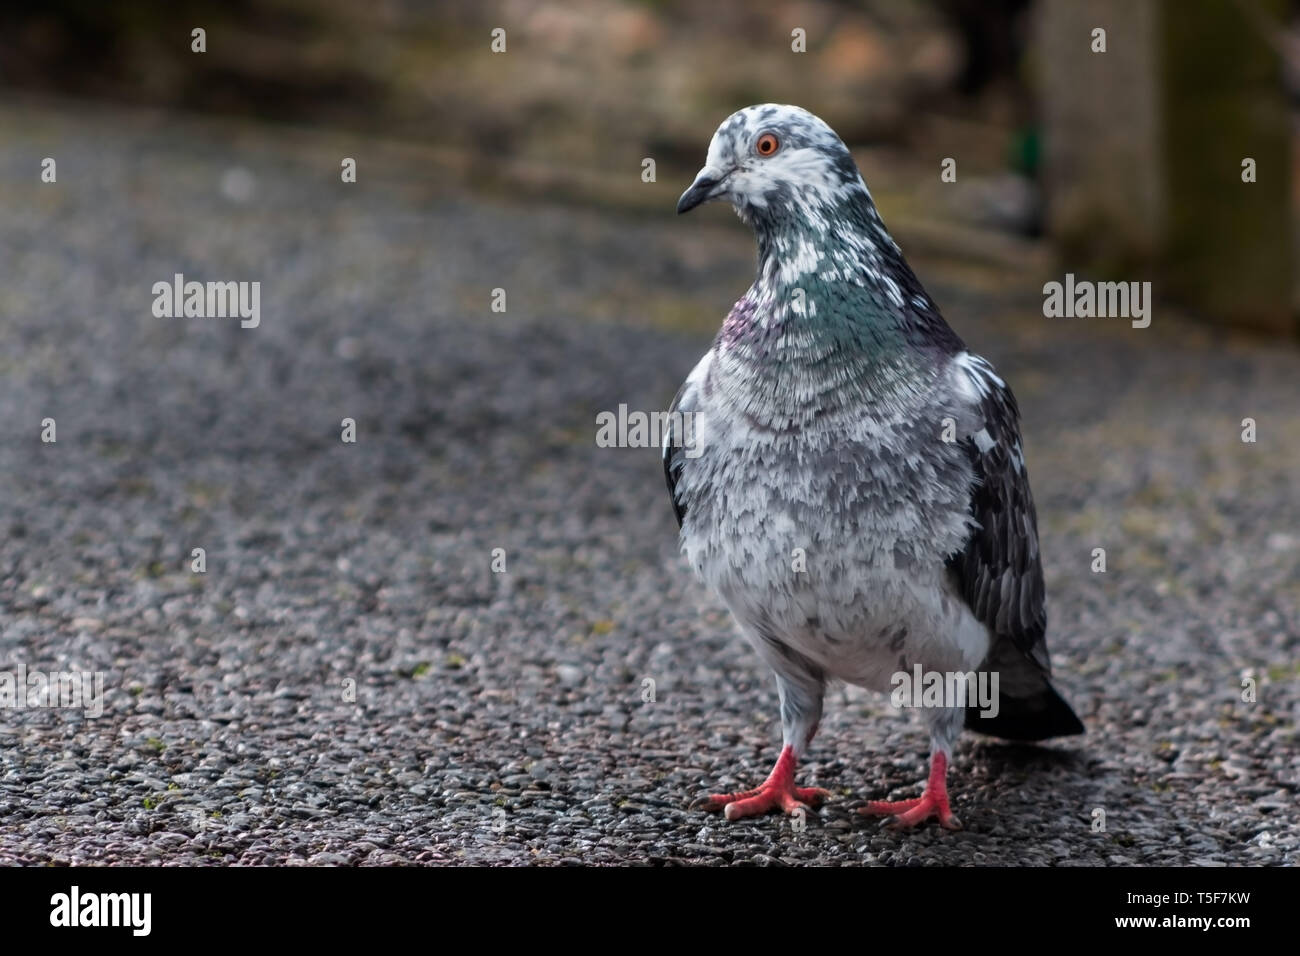 Close up of a pigeon standing on tarmac Stock Photo